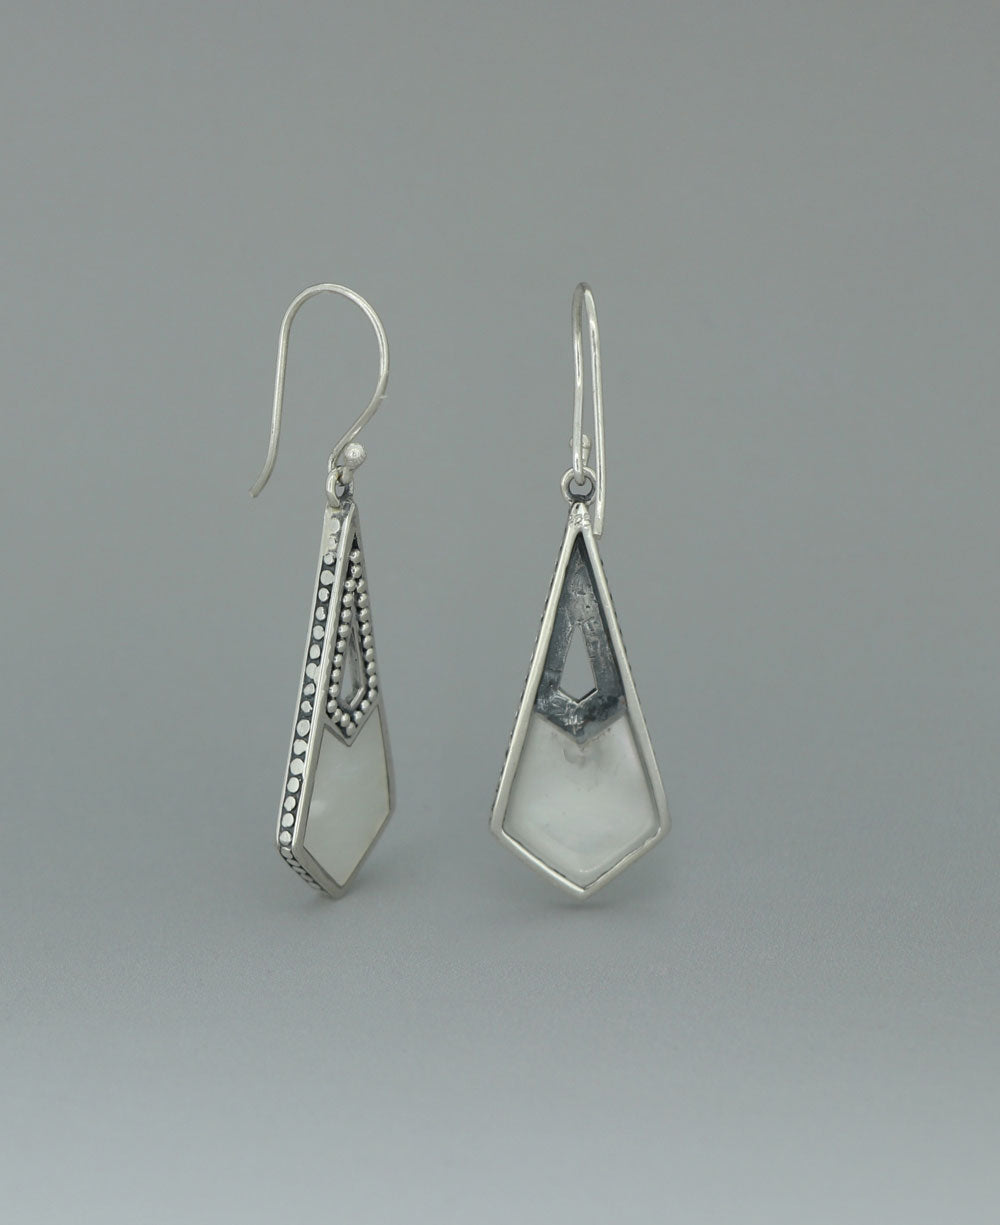 Sterling silver Mother of Pearl earrings, emphasizing the beaded silver frame and the striking contrast between the lustrous shell and geometric design